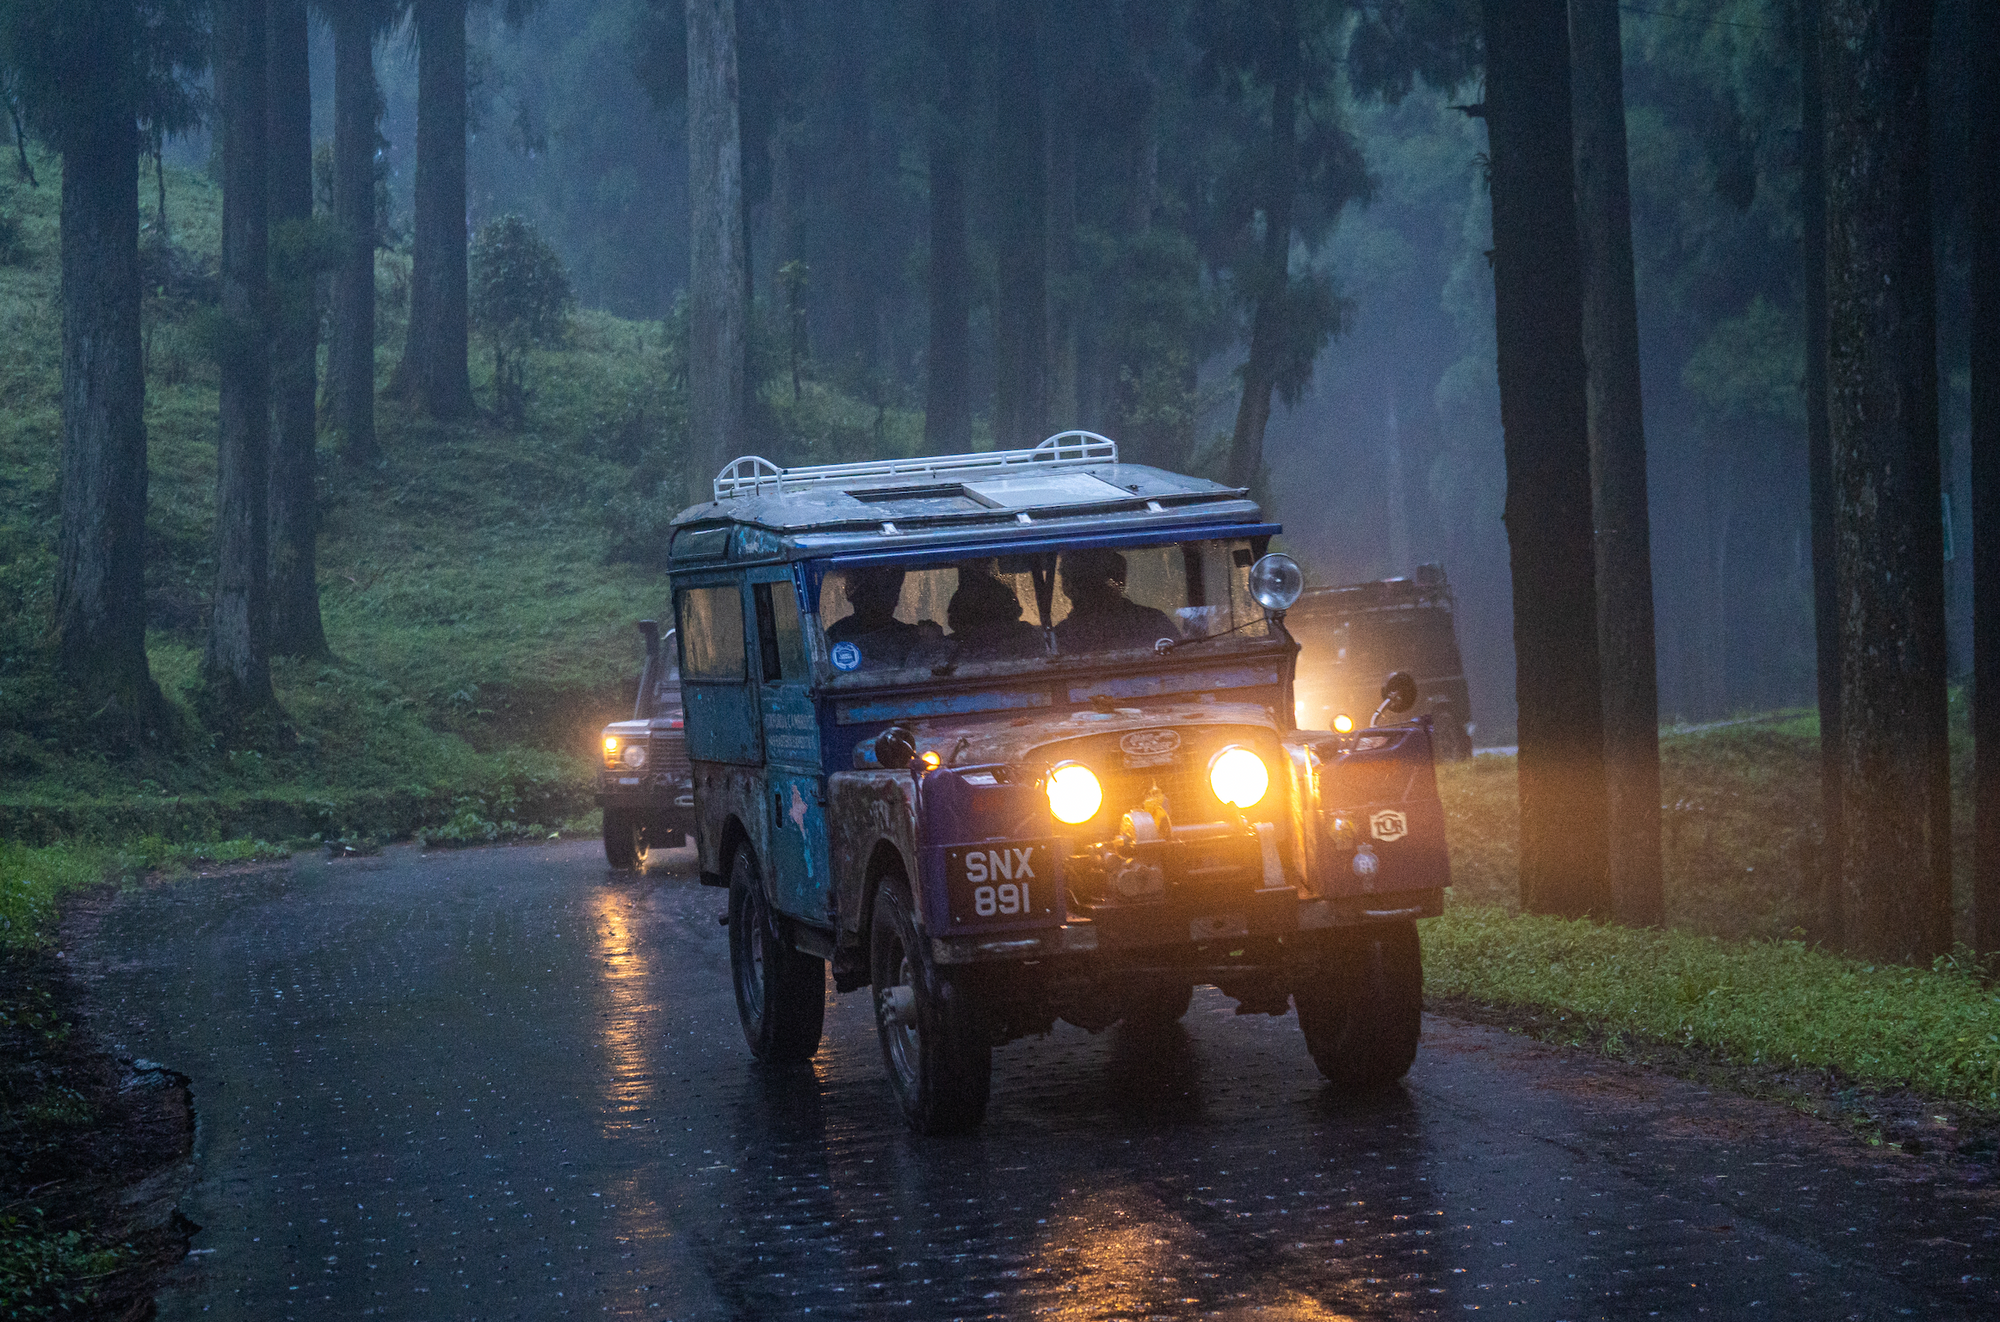 Alex Bescoby: The Last Overland – Land Rover Adventure from Singapore to London